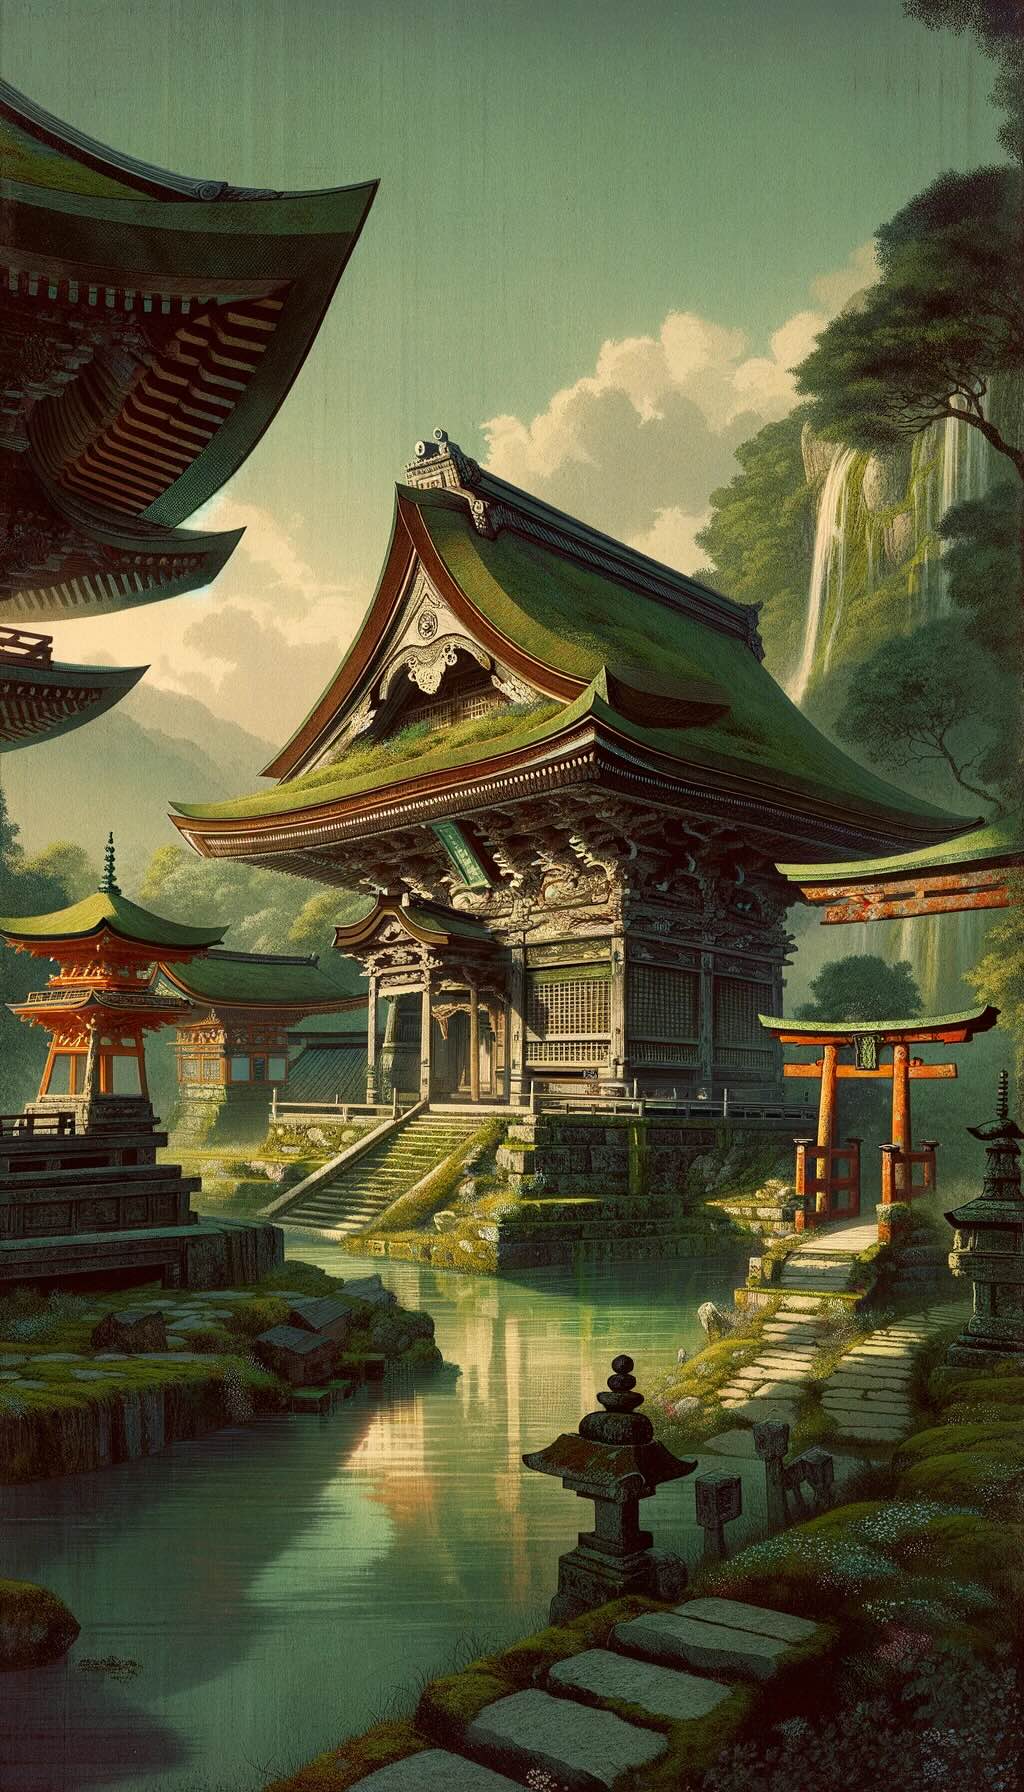 Ancient Japanese shrines and temples, capturing their spiritual and architectural brilliance as sanctuaries of solitude